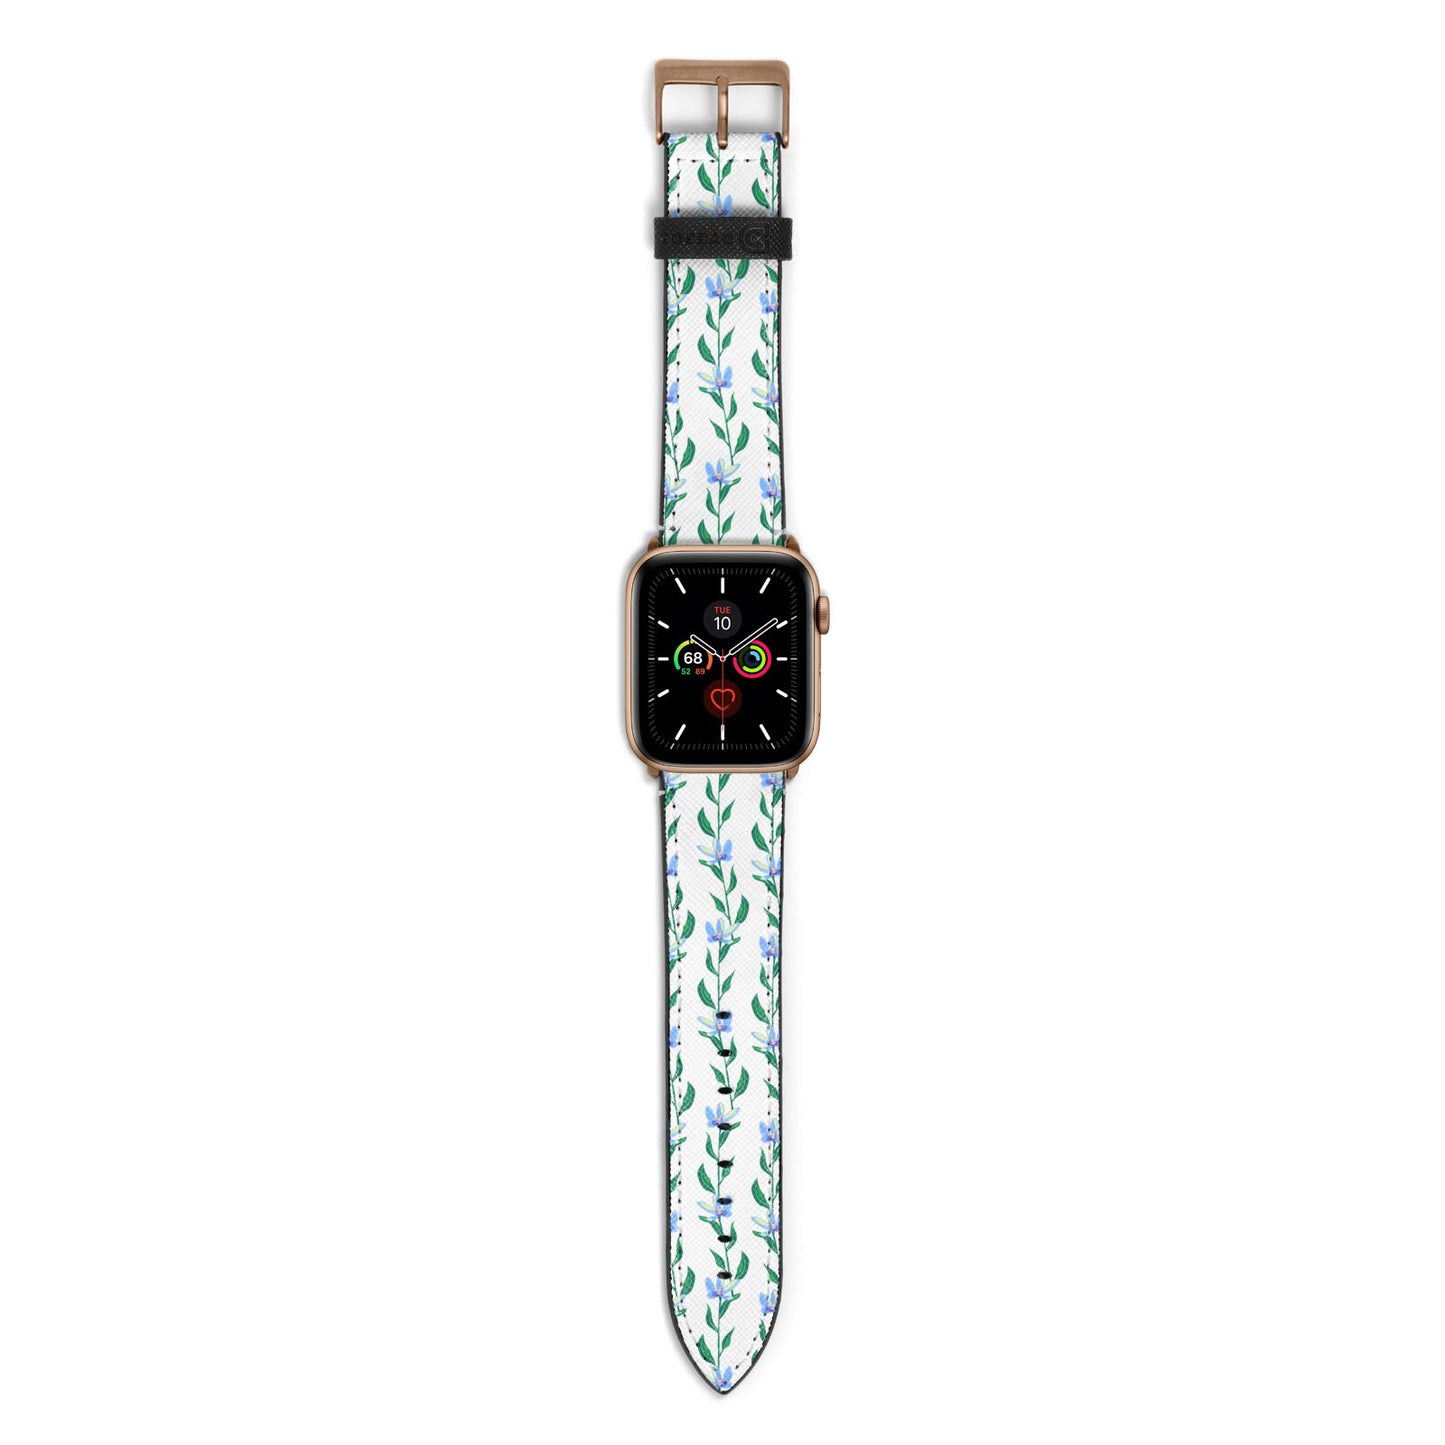 Flower Chain Apple Watch Strap with Gold Hardware